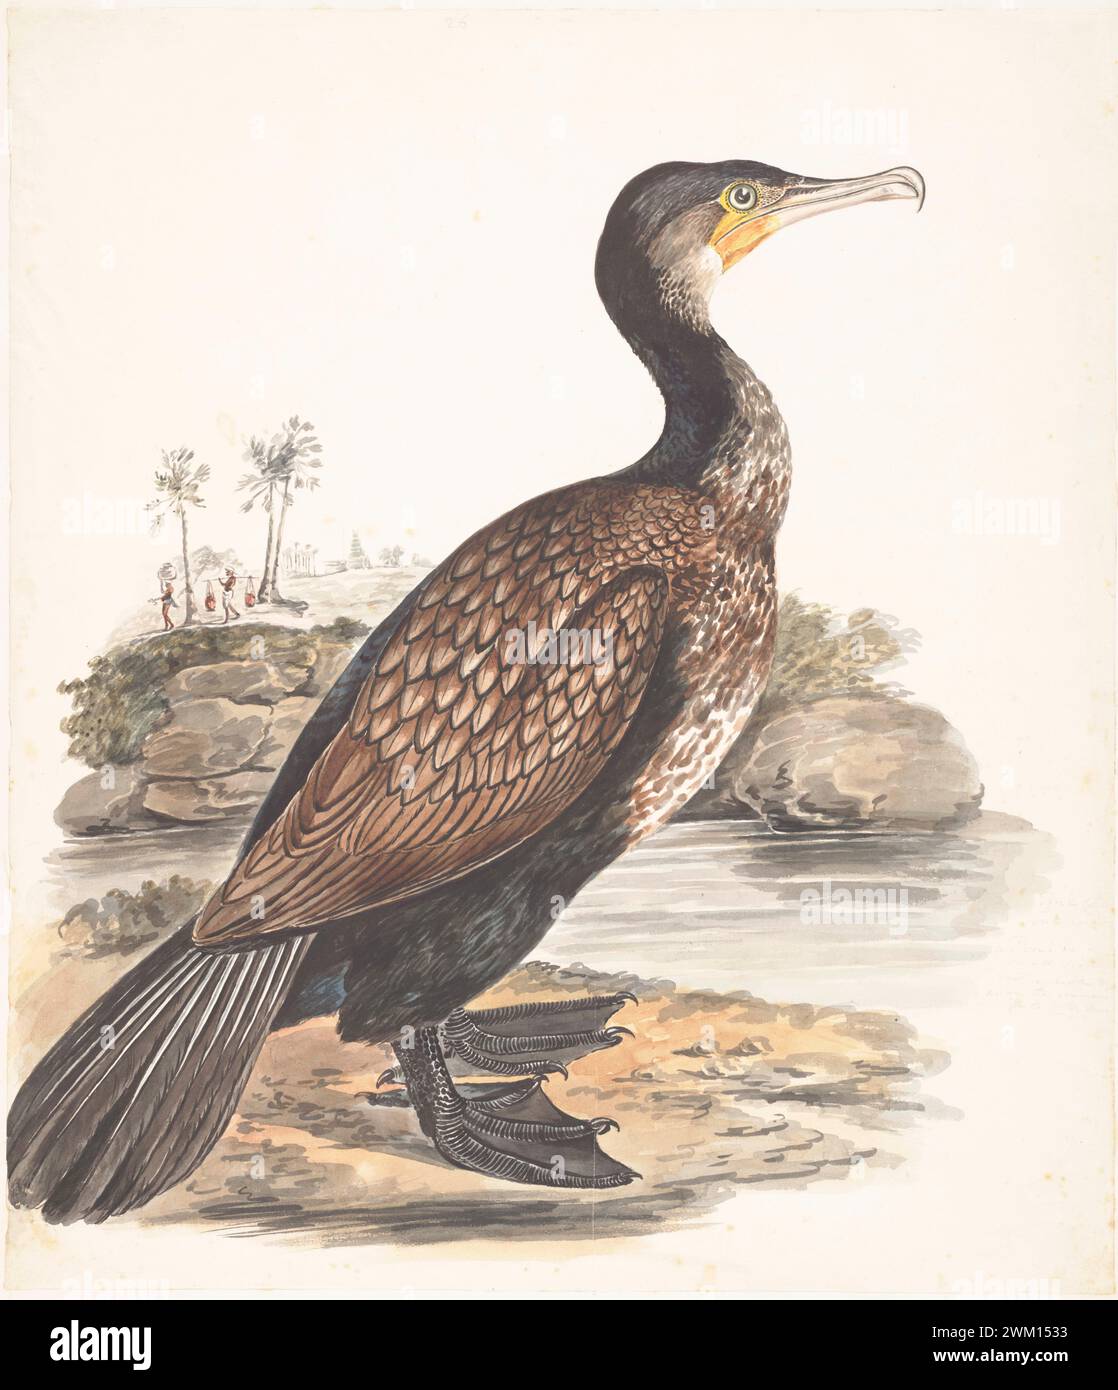 Great cormorant (Phalacrocorax carbo) by Gwillim Elizabeth in 1801 Stock Photo